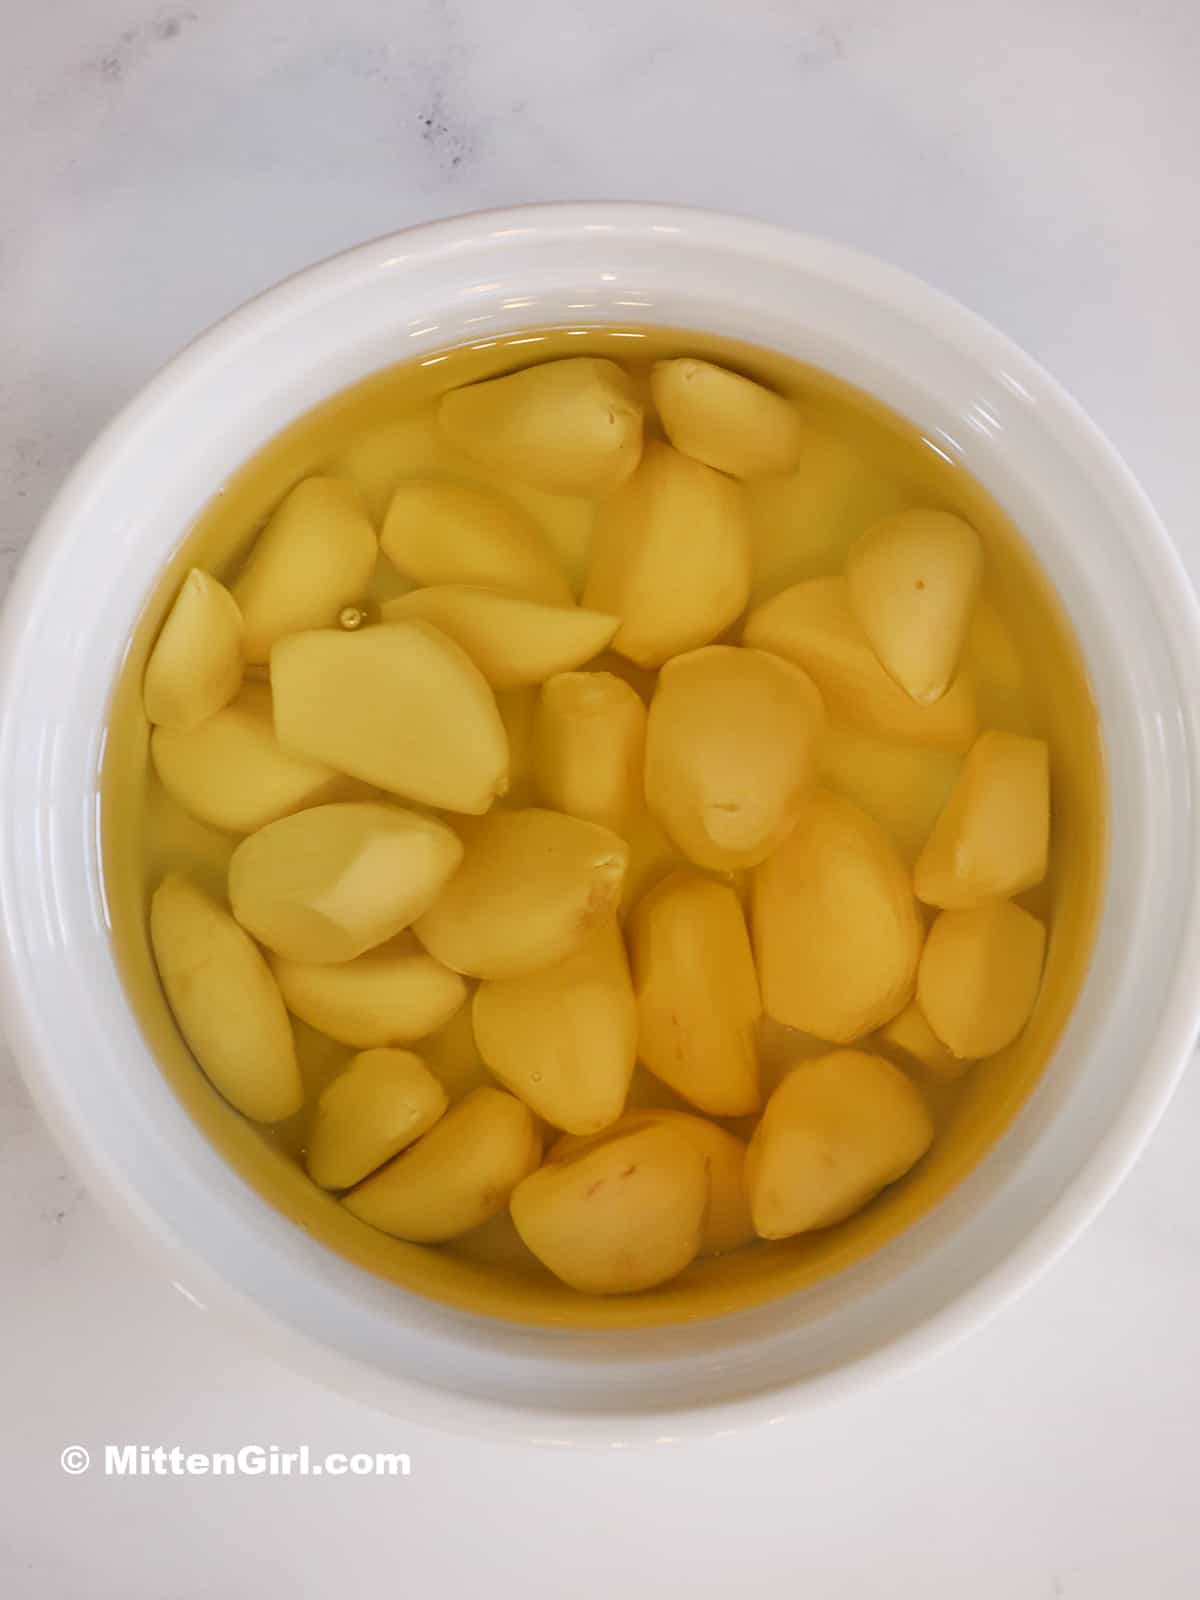 Peeled garlic and olive oil in a baking dish.